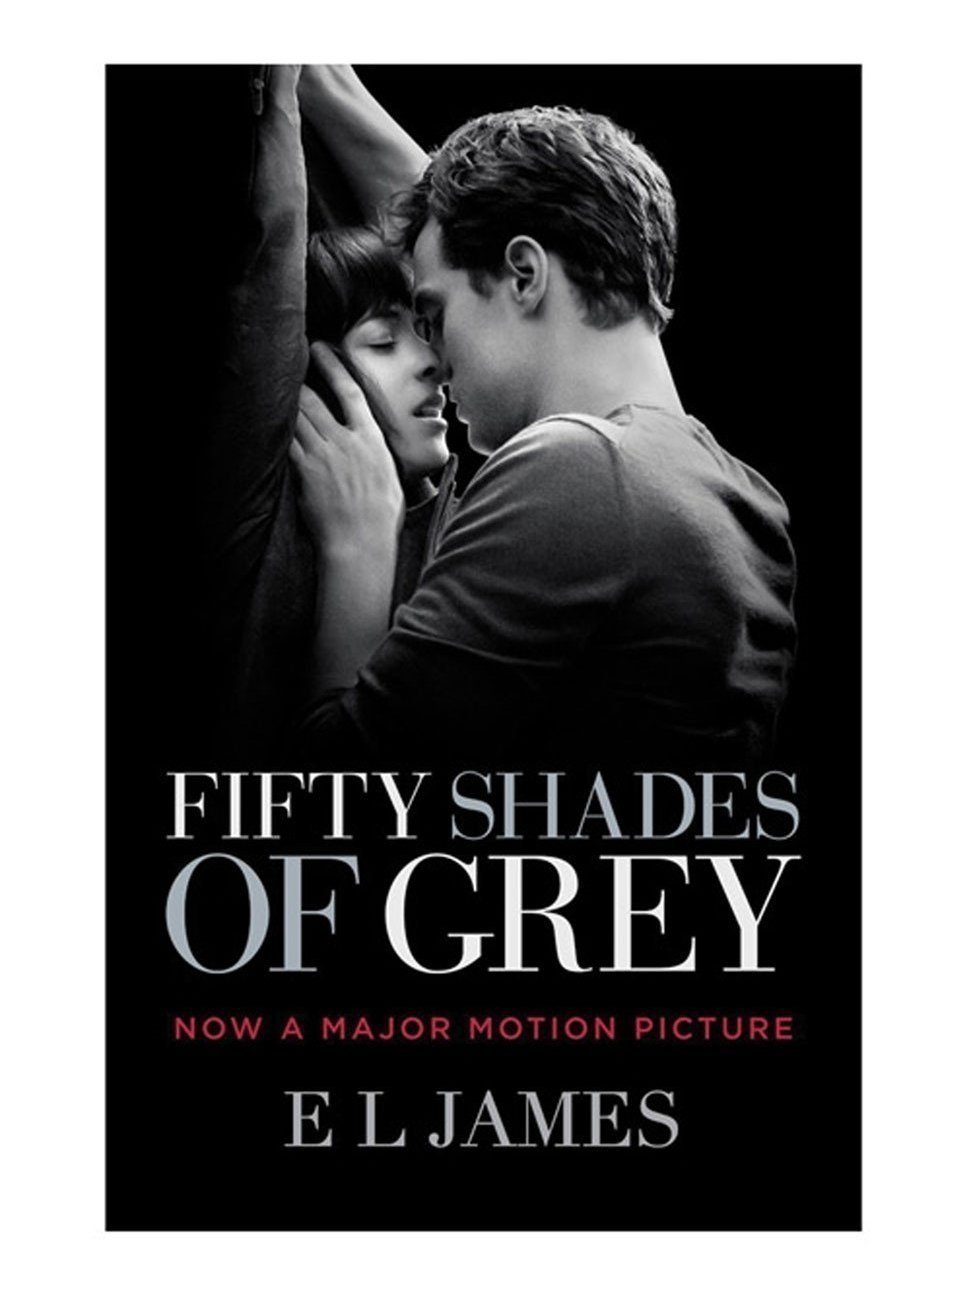 +18 Fifty Shades of Grey 2015 full movie download